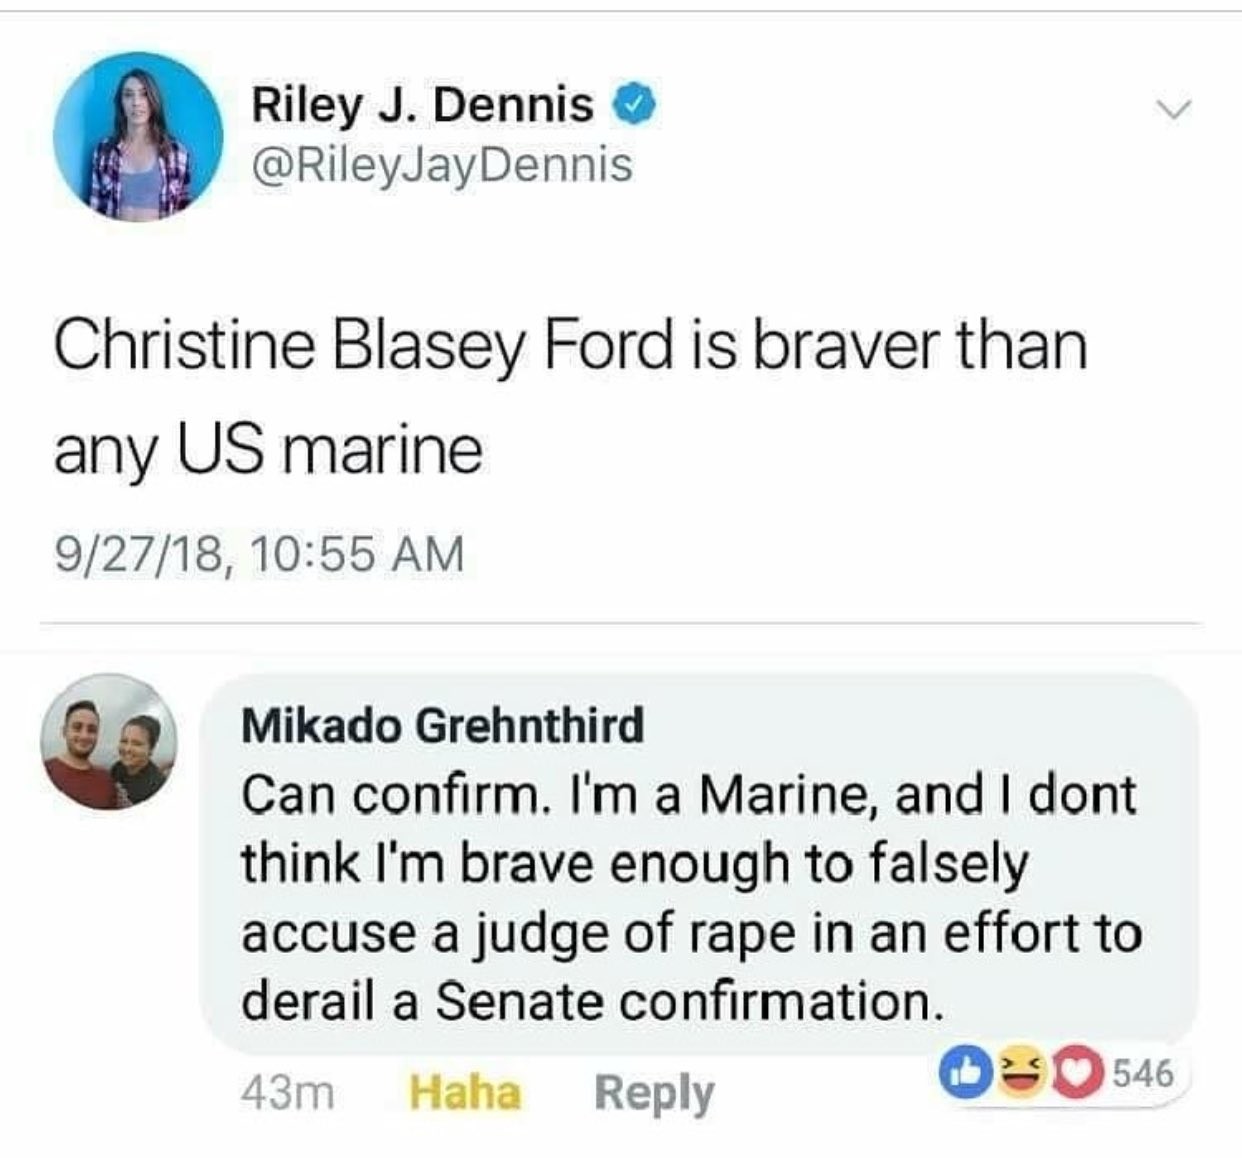 christine blasey ford is braver than any us marine - Riley J. Dennis Jay Dennis Christine Blasey Ford is braver than any Us marine 92718, Mikado Grehnthird Can confirm. I'm a Marine, and I dont think I'm brave enough to falsely accuse a judge of rape in a